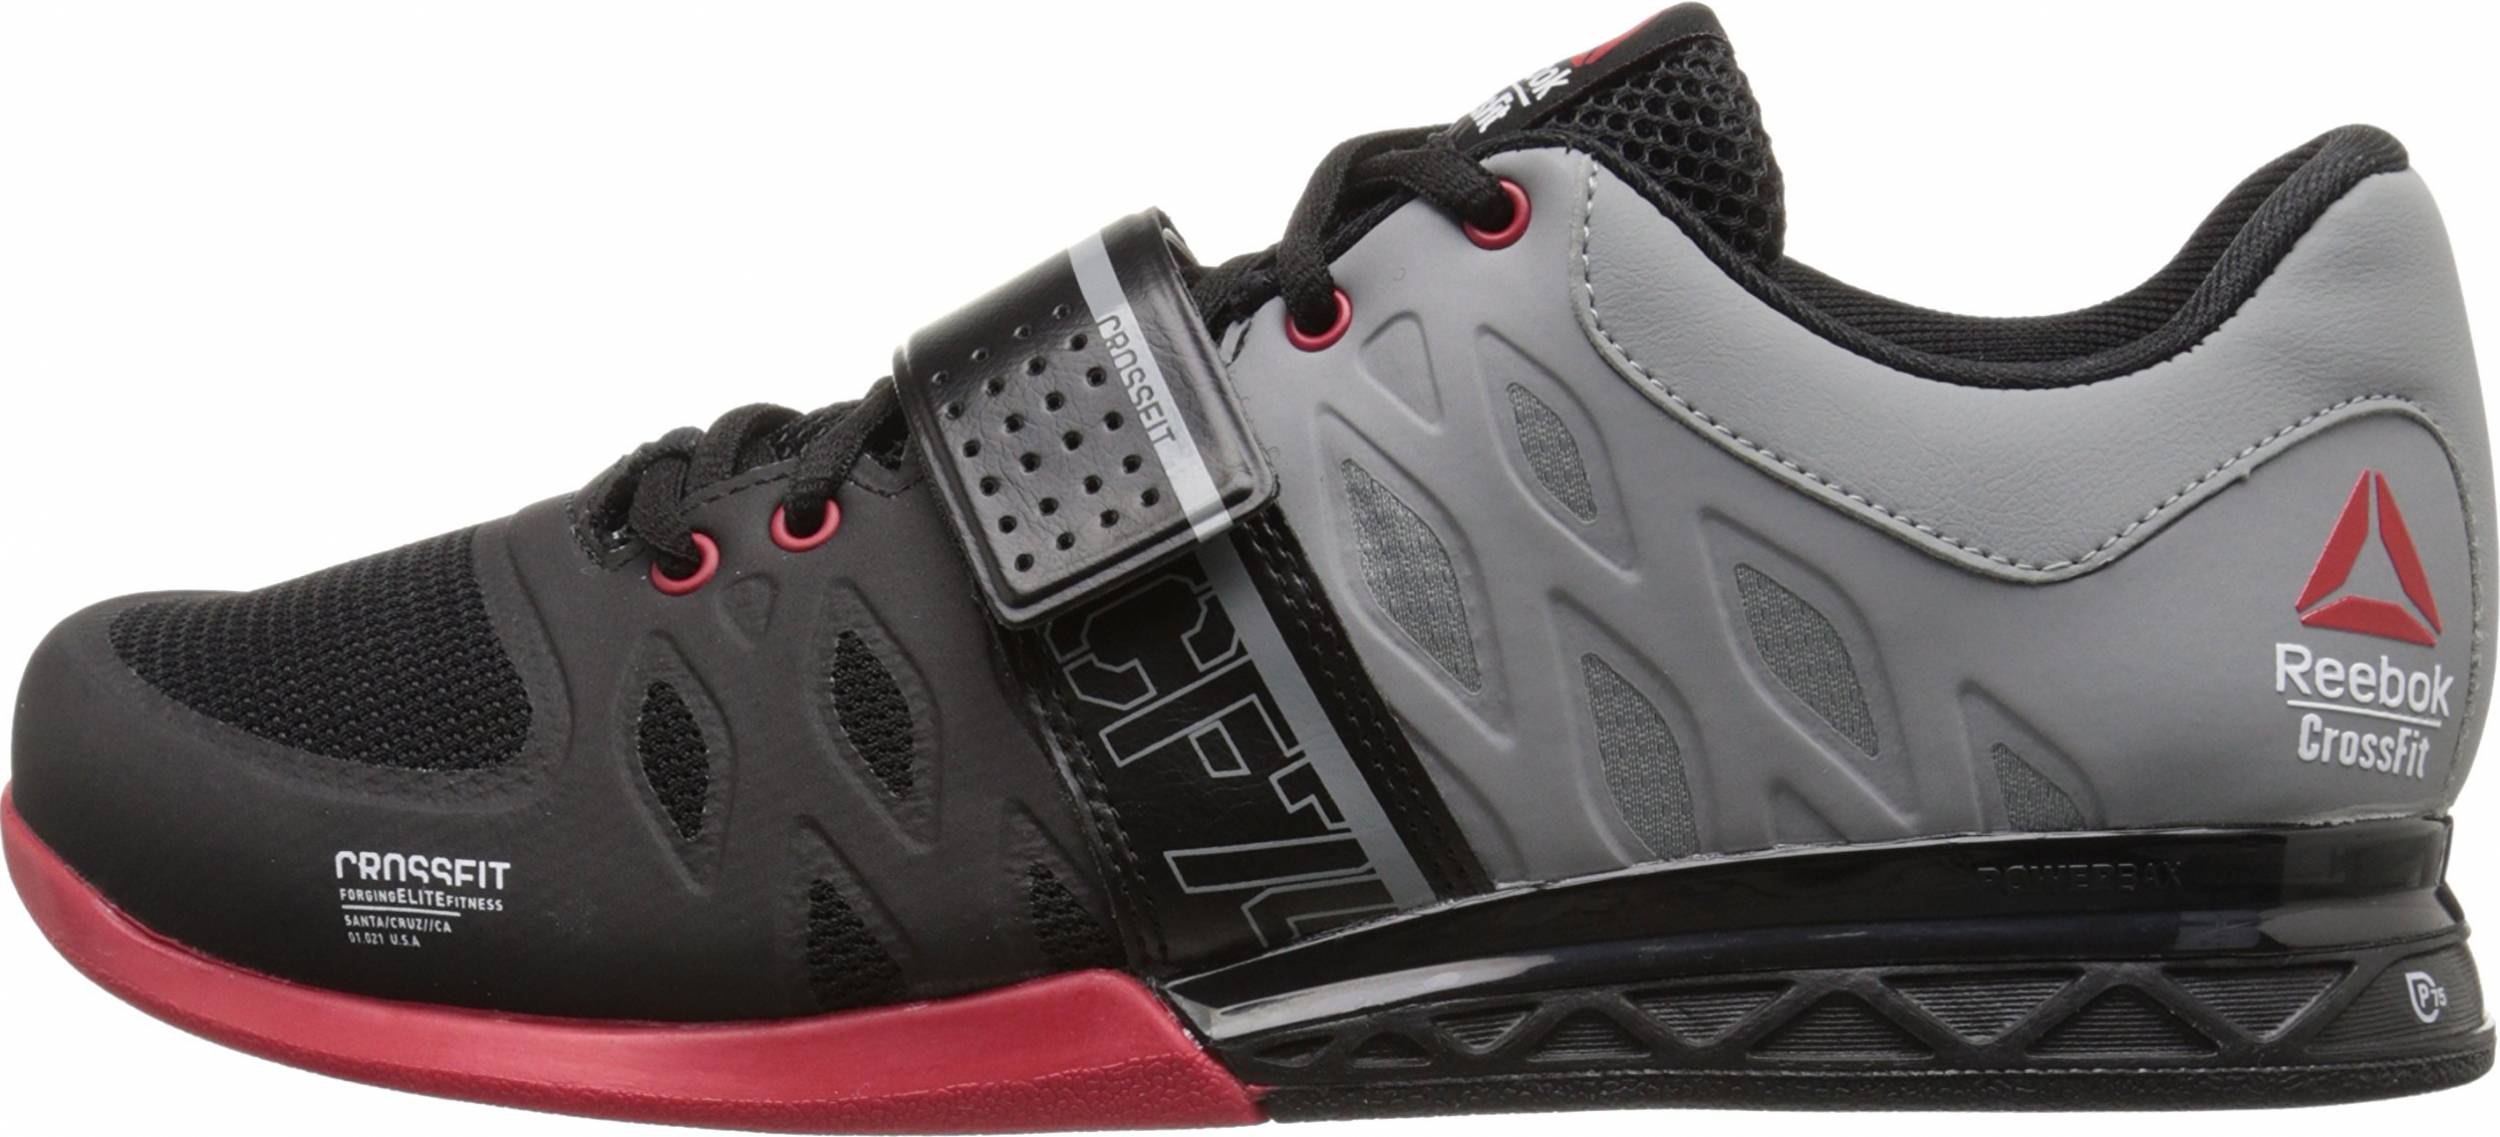 Save 67% on Weightlifting Shoes (24 